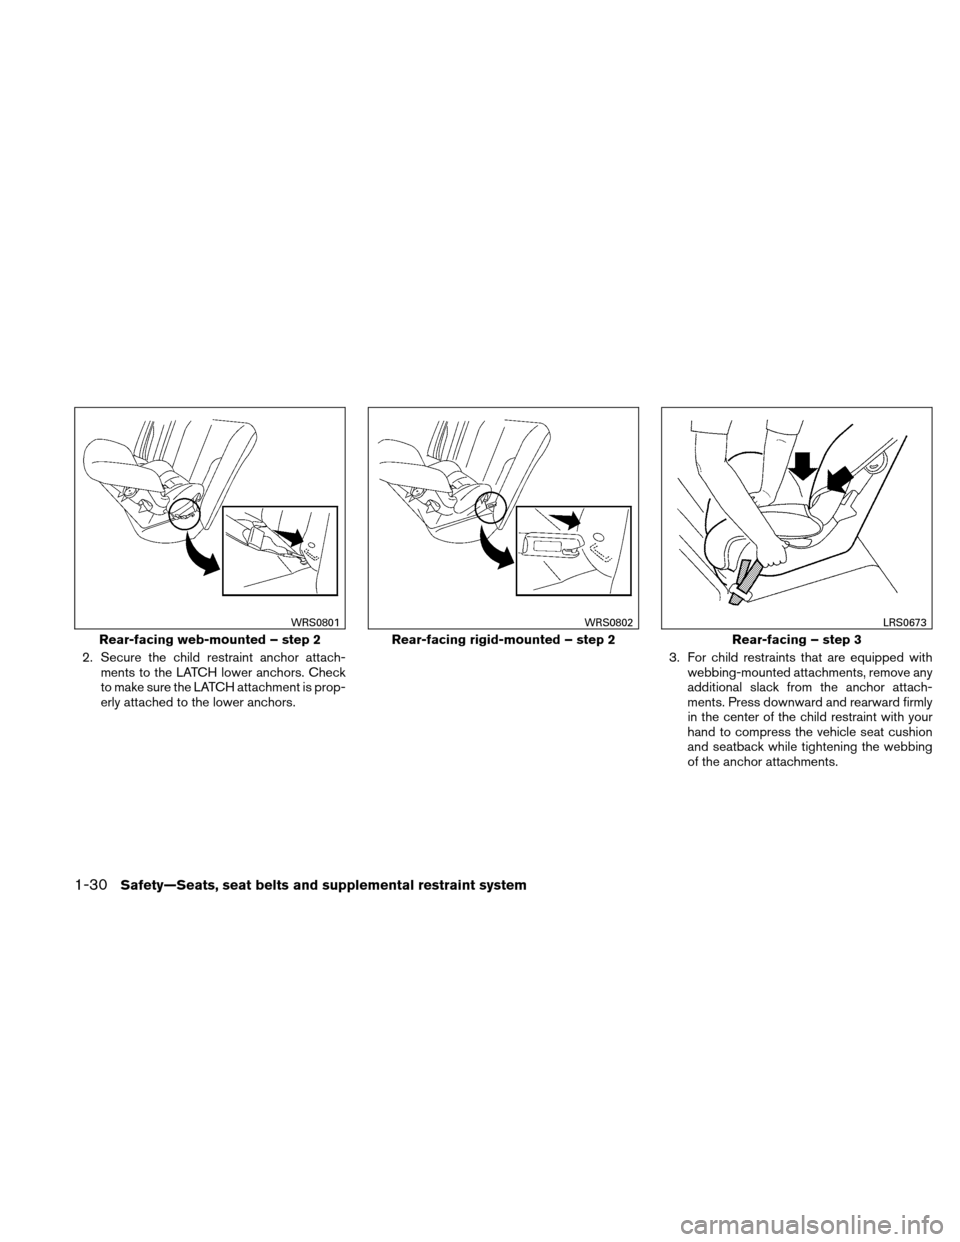 NISSAN XTERRA 2011 N50 / 2.G Service Manual 2. Secure the child restraint anchor attach-ments to the LATCH lower anchors. Check
to make sure the LATCH attachment is prop-
erly attached to the lower anchors. 3. For child restraints that are equi